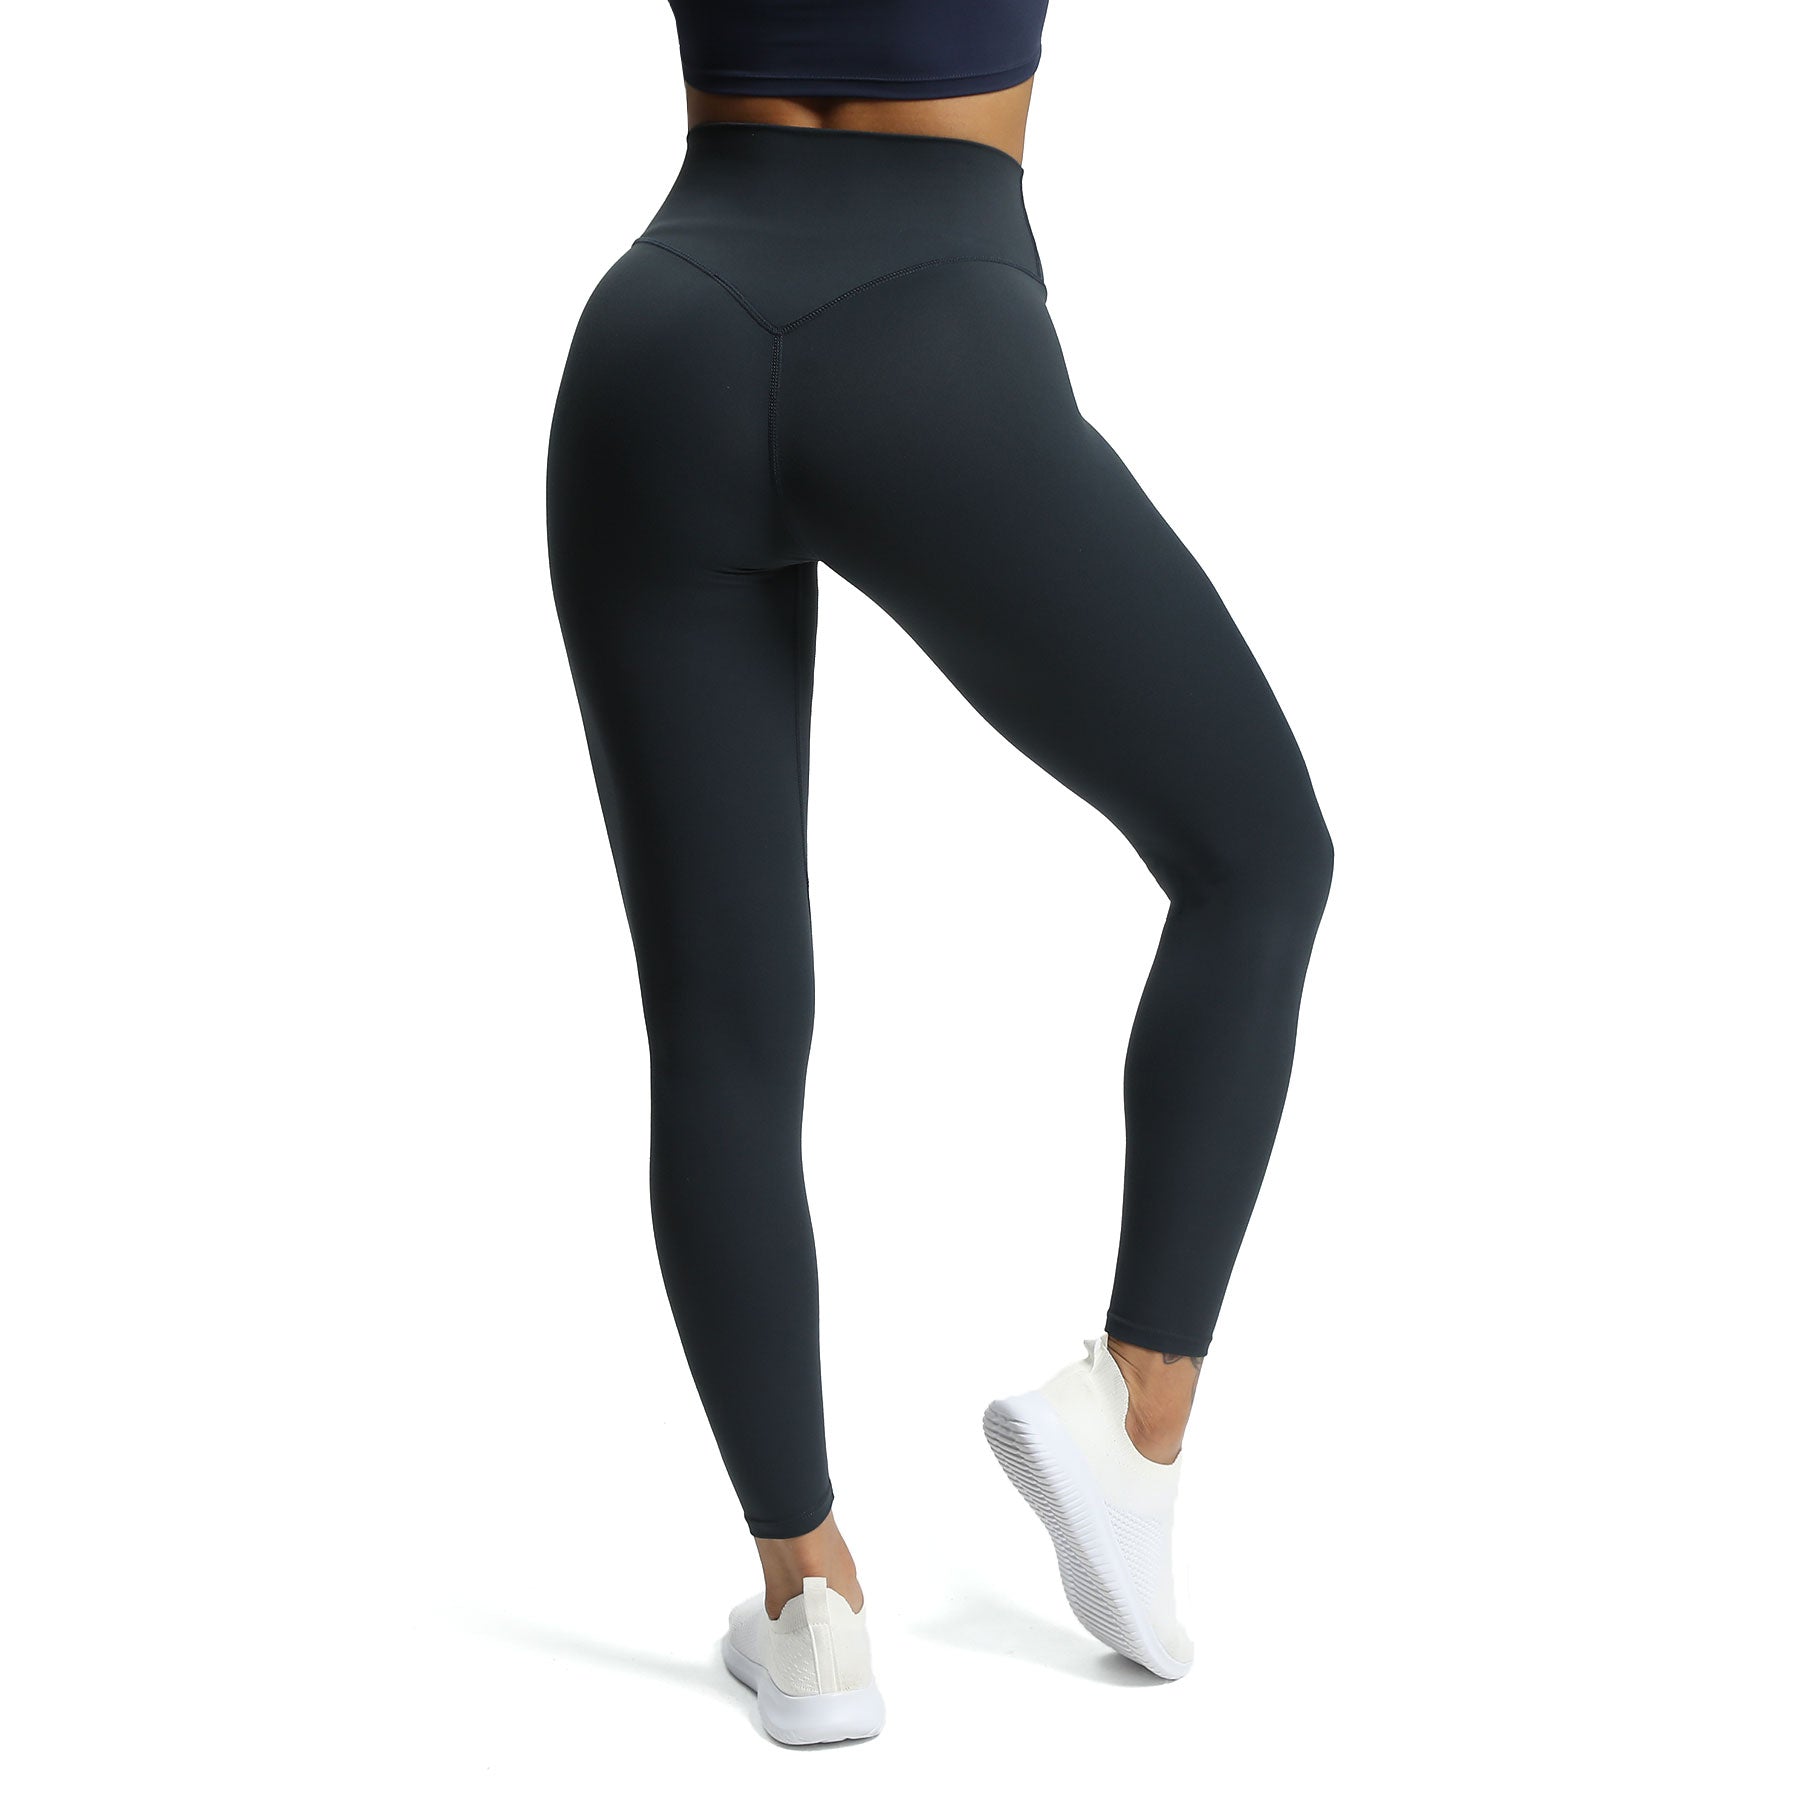 Track Terry Lounge Seamless Legging - Oxide - 4X/5X at Skims